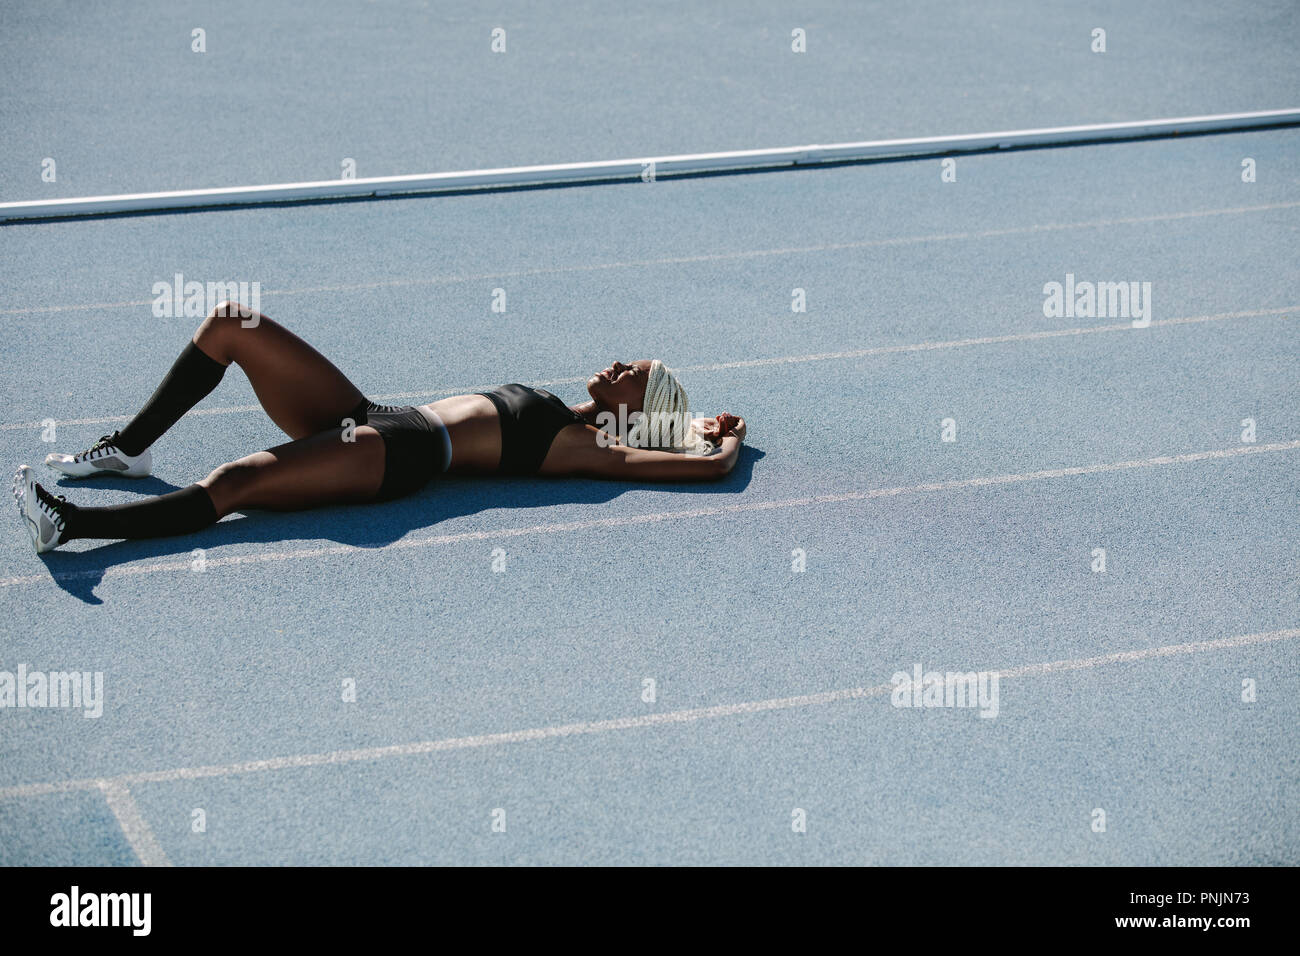 Woman athlete lying on the running track relaxing after training. Female sprinter resting after workout lying on track on a sunny day. Stock Photo